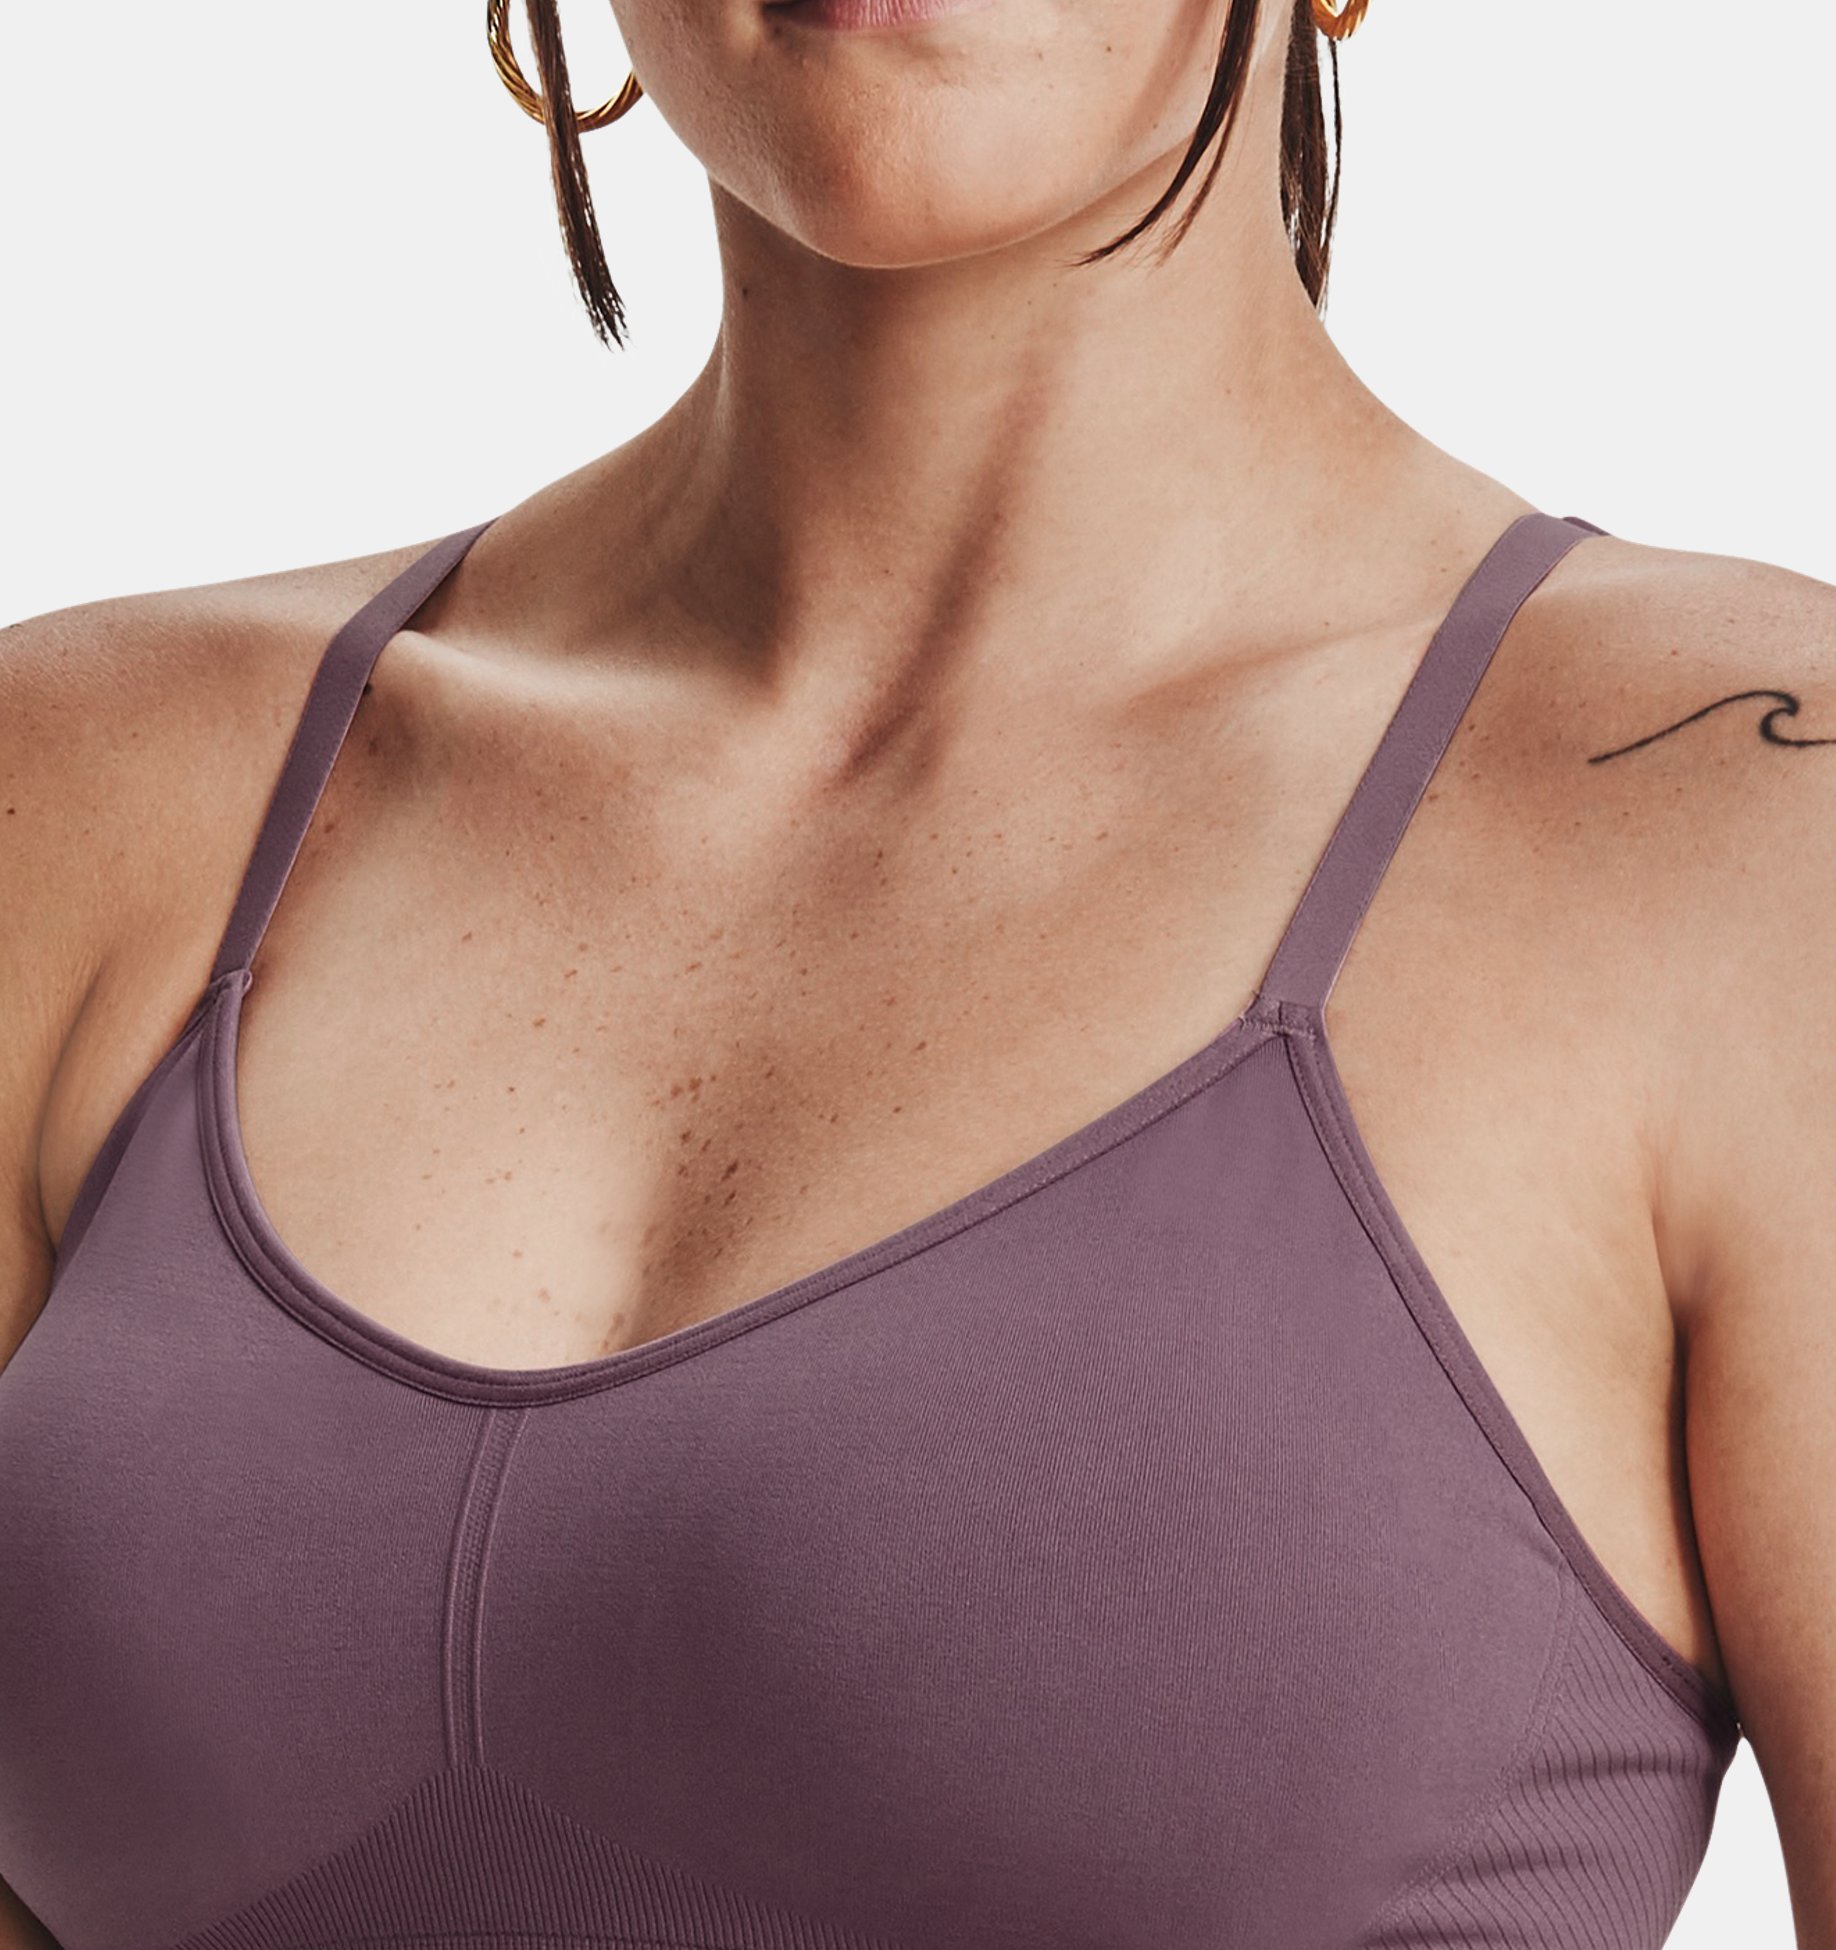 Under Armour Seamless Plunge Bra Afterglow 1248336-864 - Free